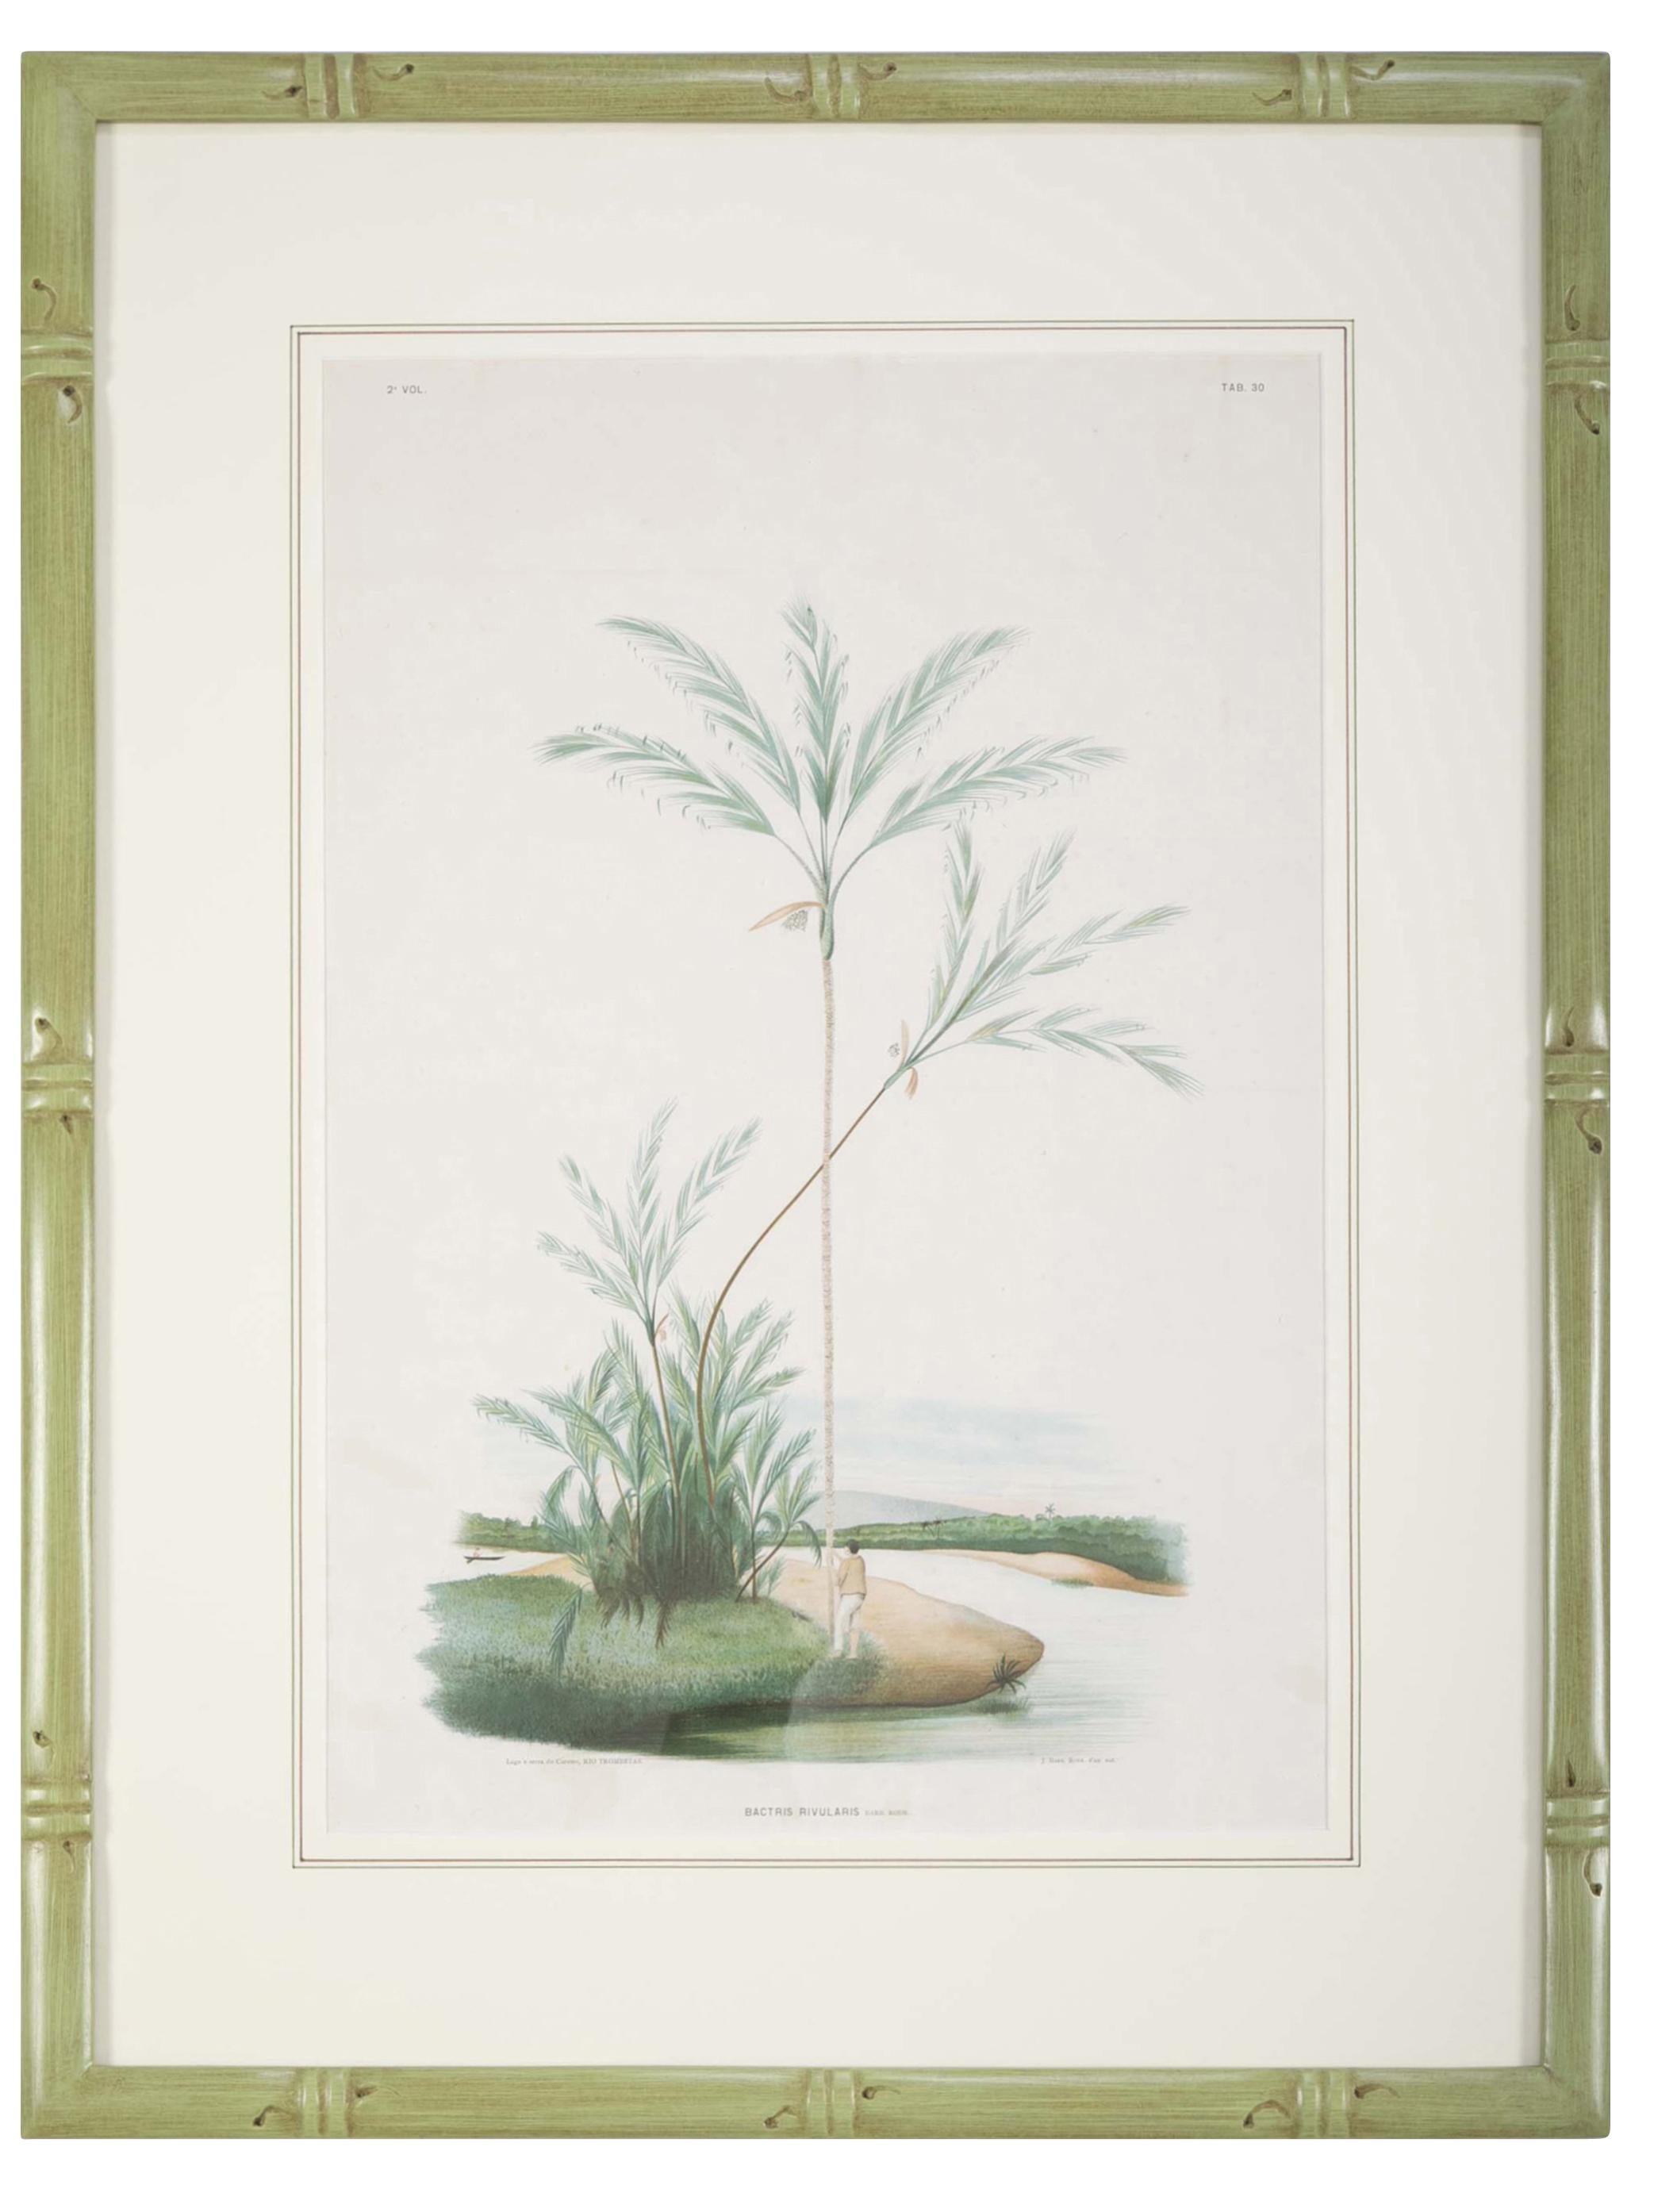 Set of Four Chromolithographs of Brazilian Palms by Joao Barbosa Rodrigues 1